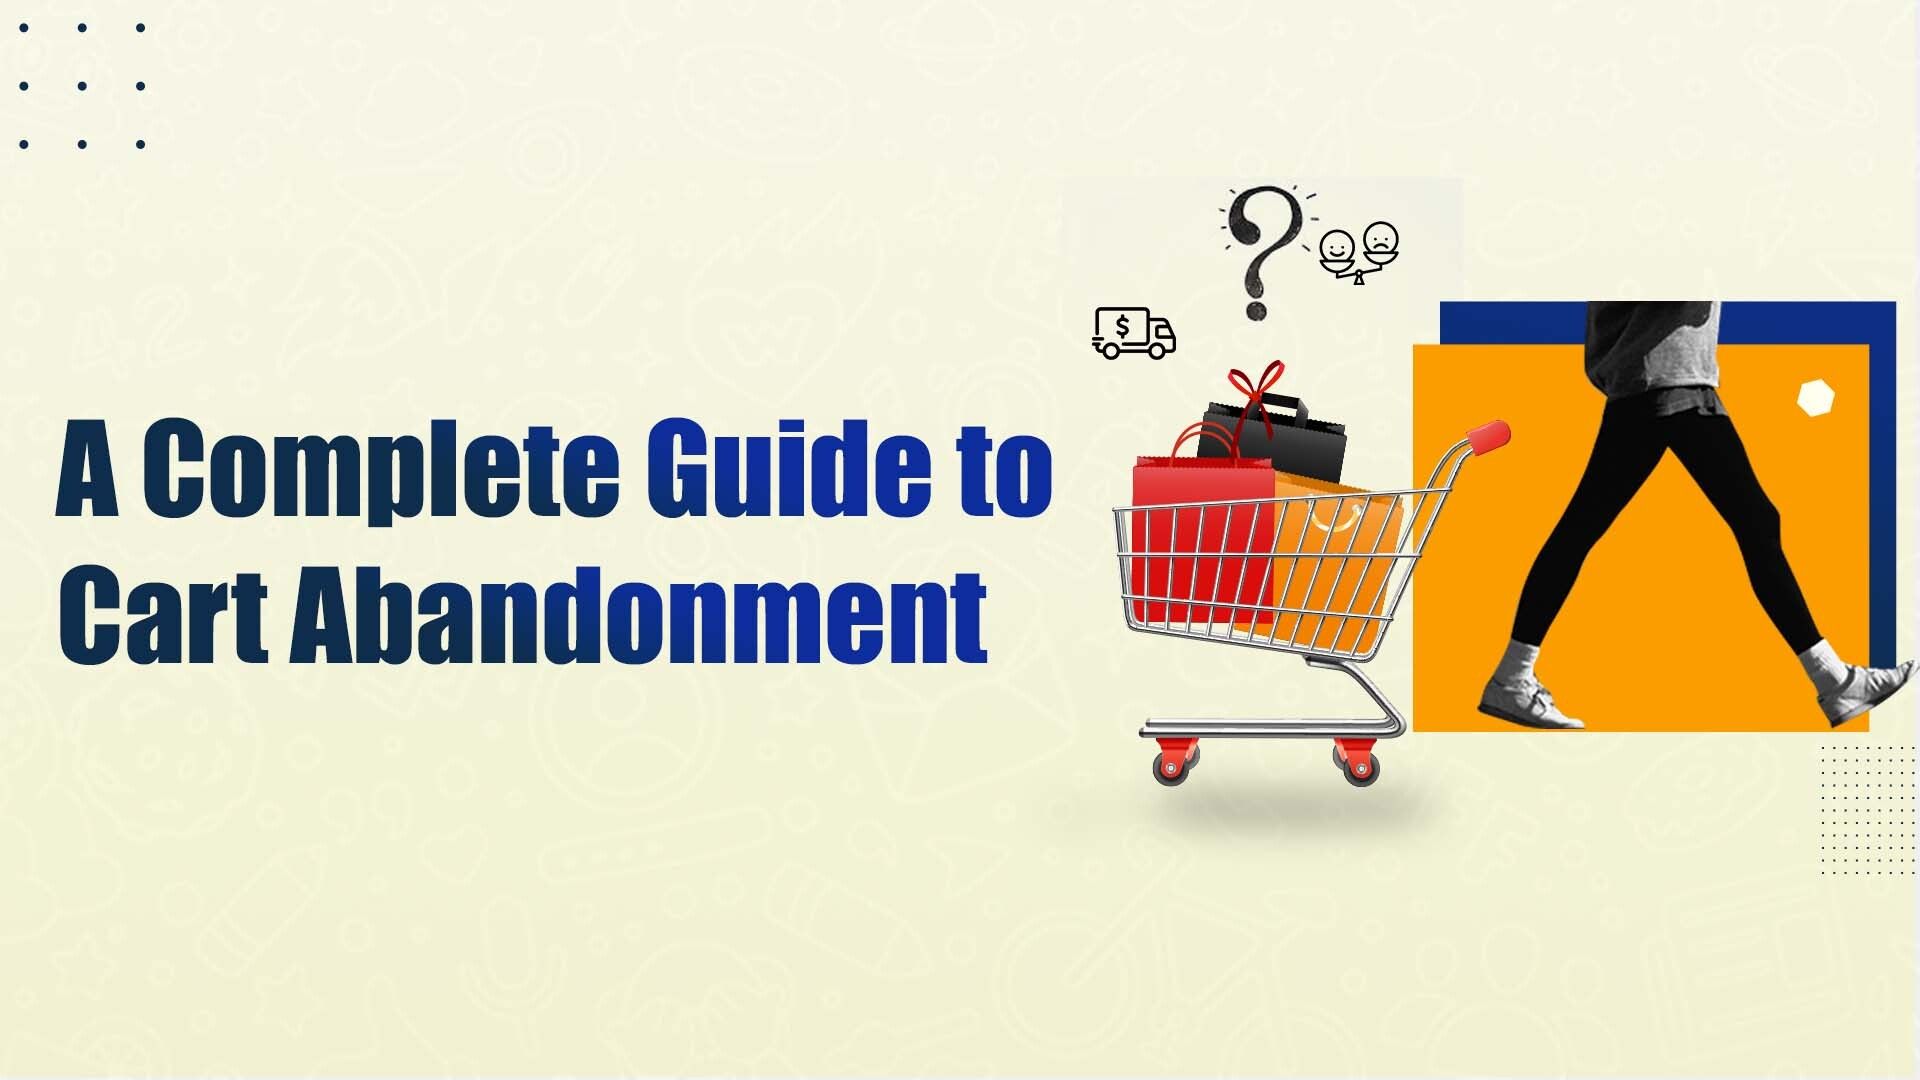 A Complete Guide to Cart Abandonment